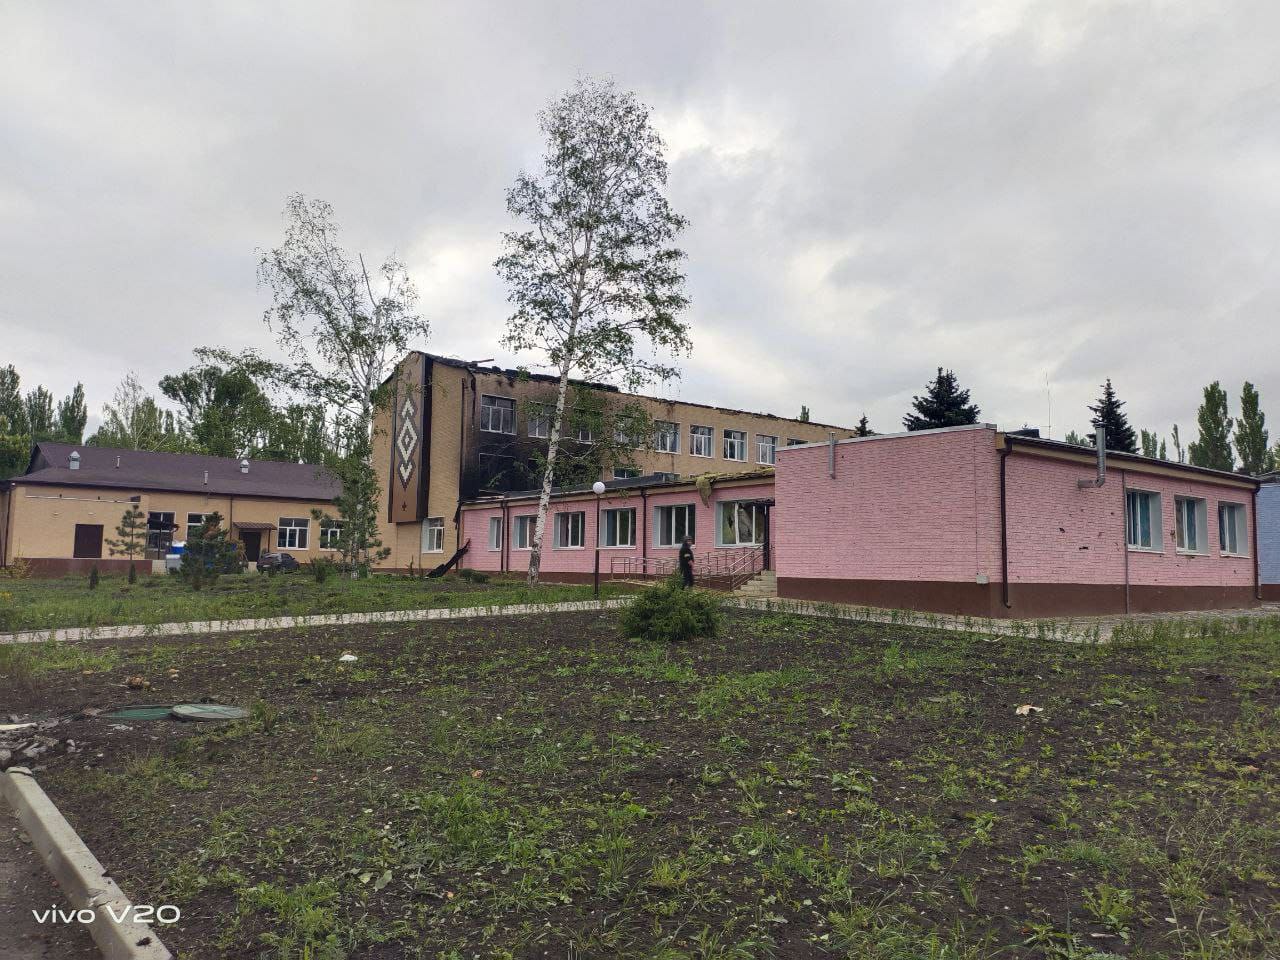 38 settlements were shelled in Donbas over the past day, 62 civilian objects were damaged or ruined, including 53 houses, an agricultural enterprise, a kindergarten, a bank branch, a pharmacy and the national police administration building. At least seven people died and six injured